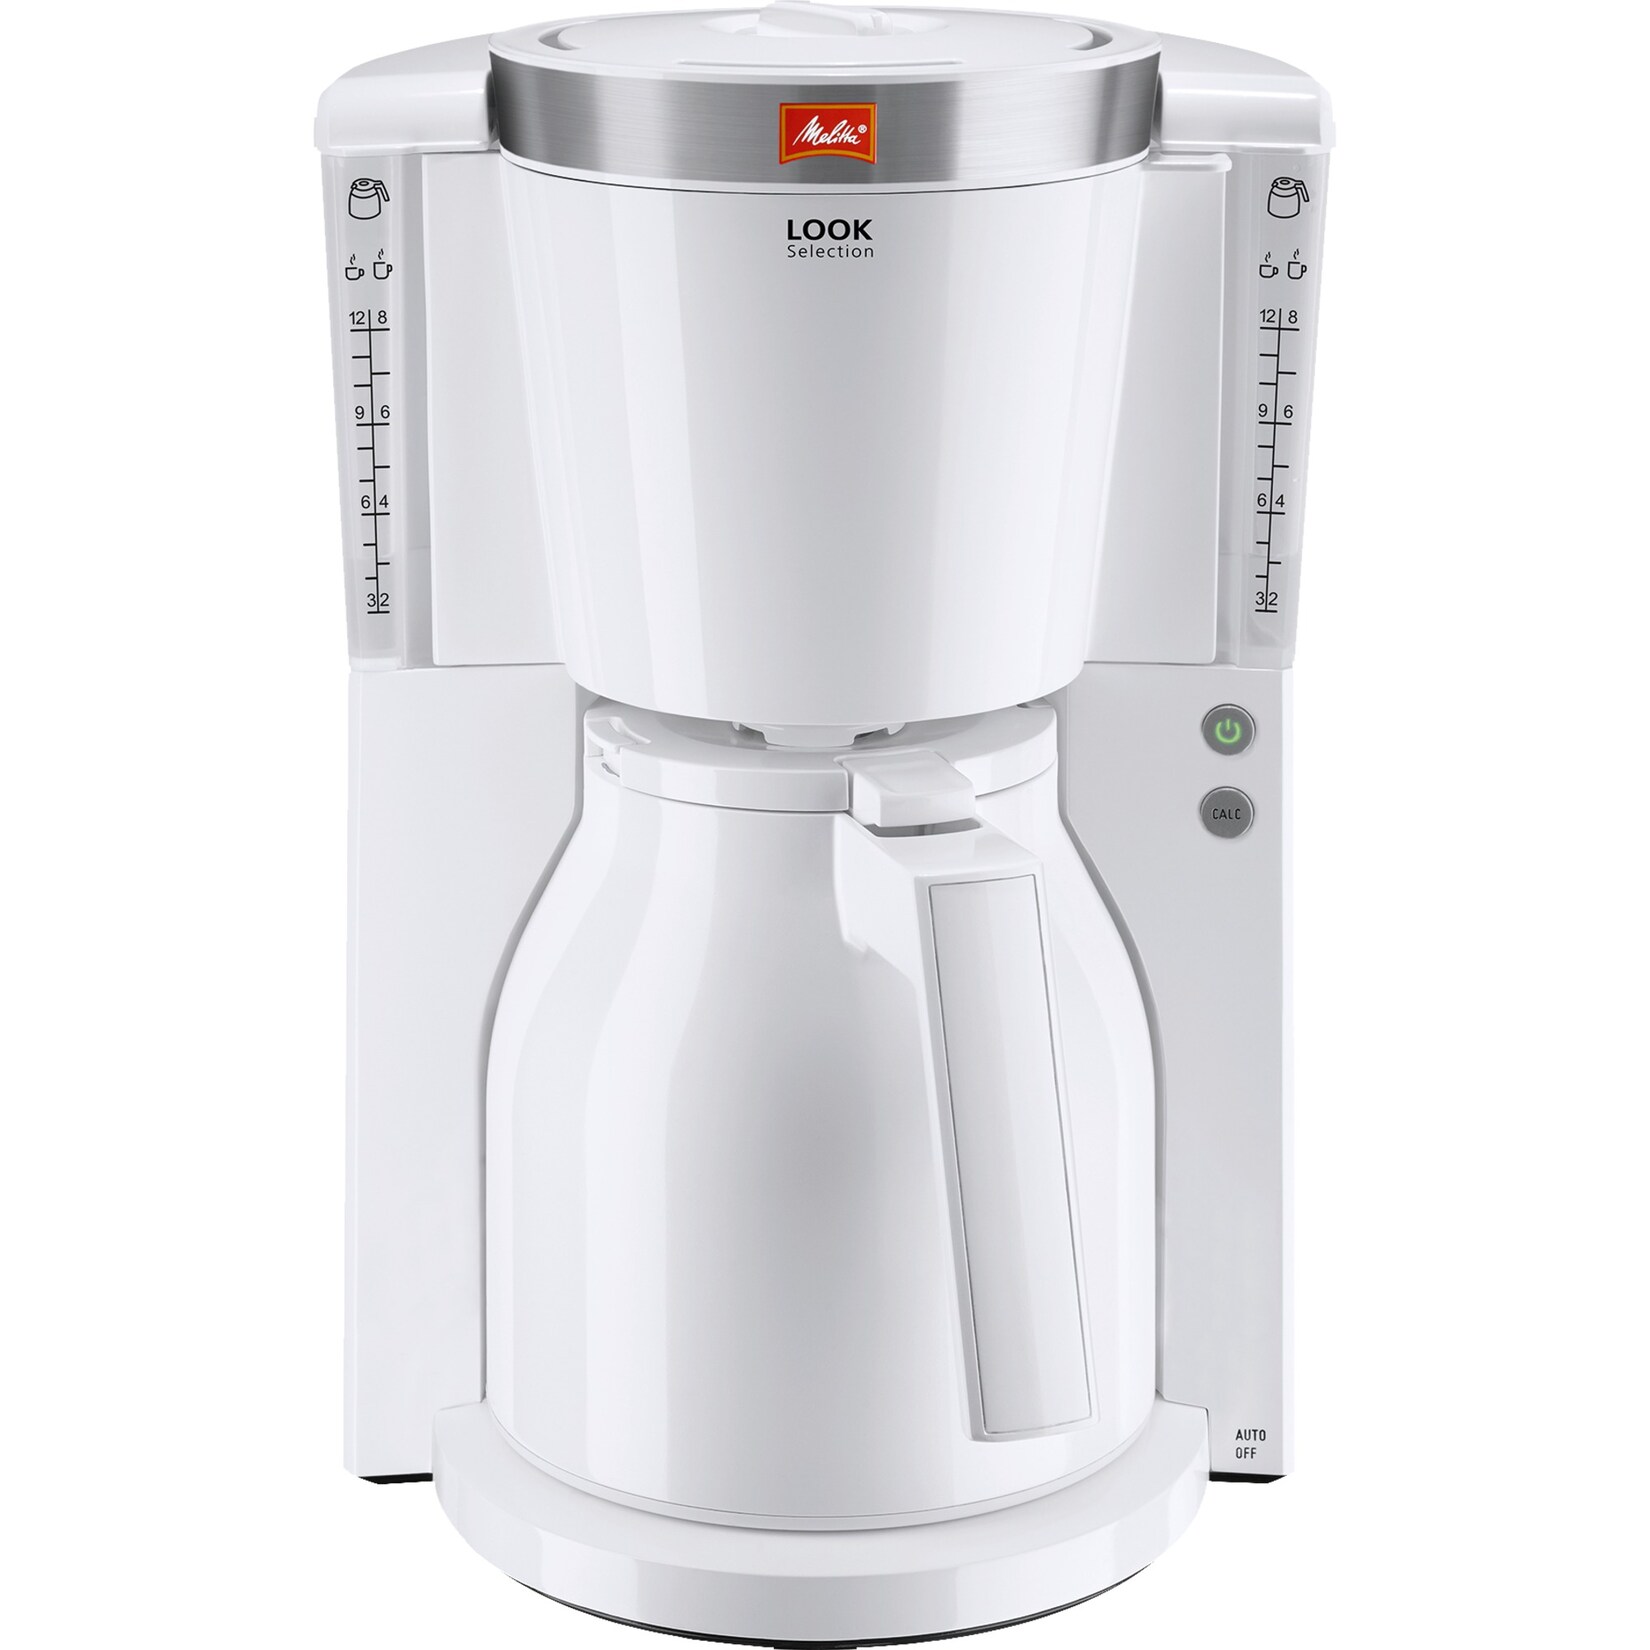 Melitta Filtermaschine Look Therm Selection